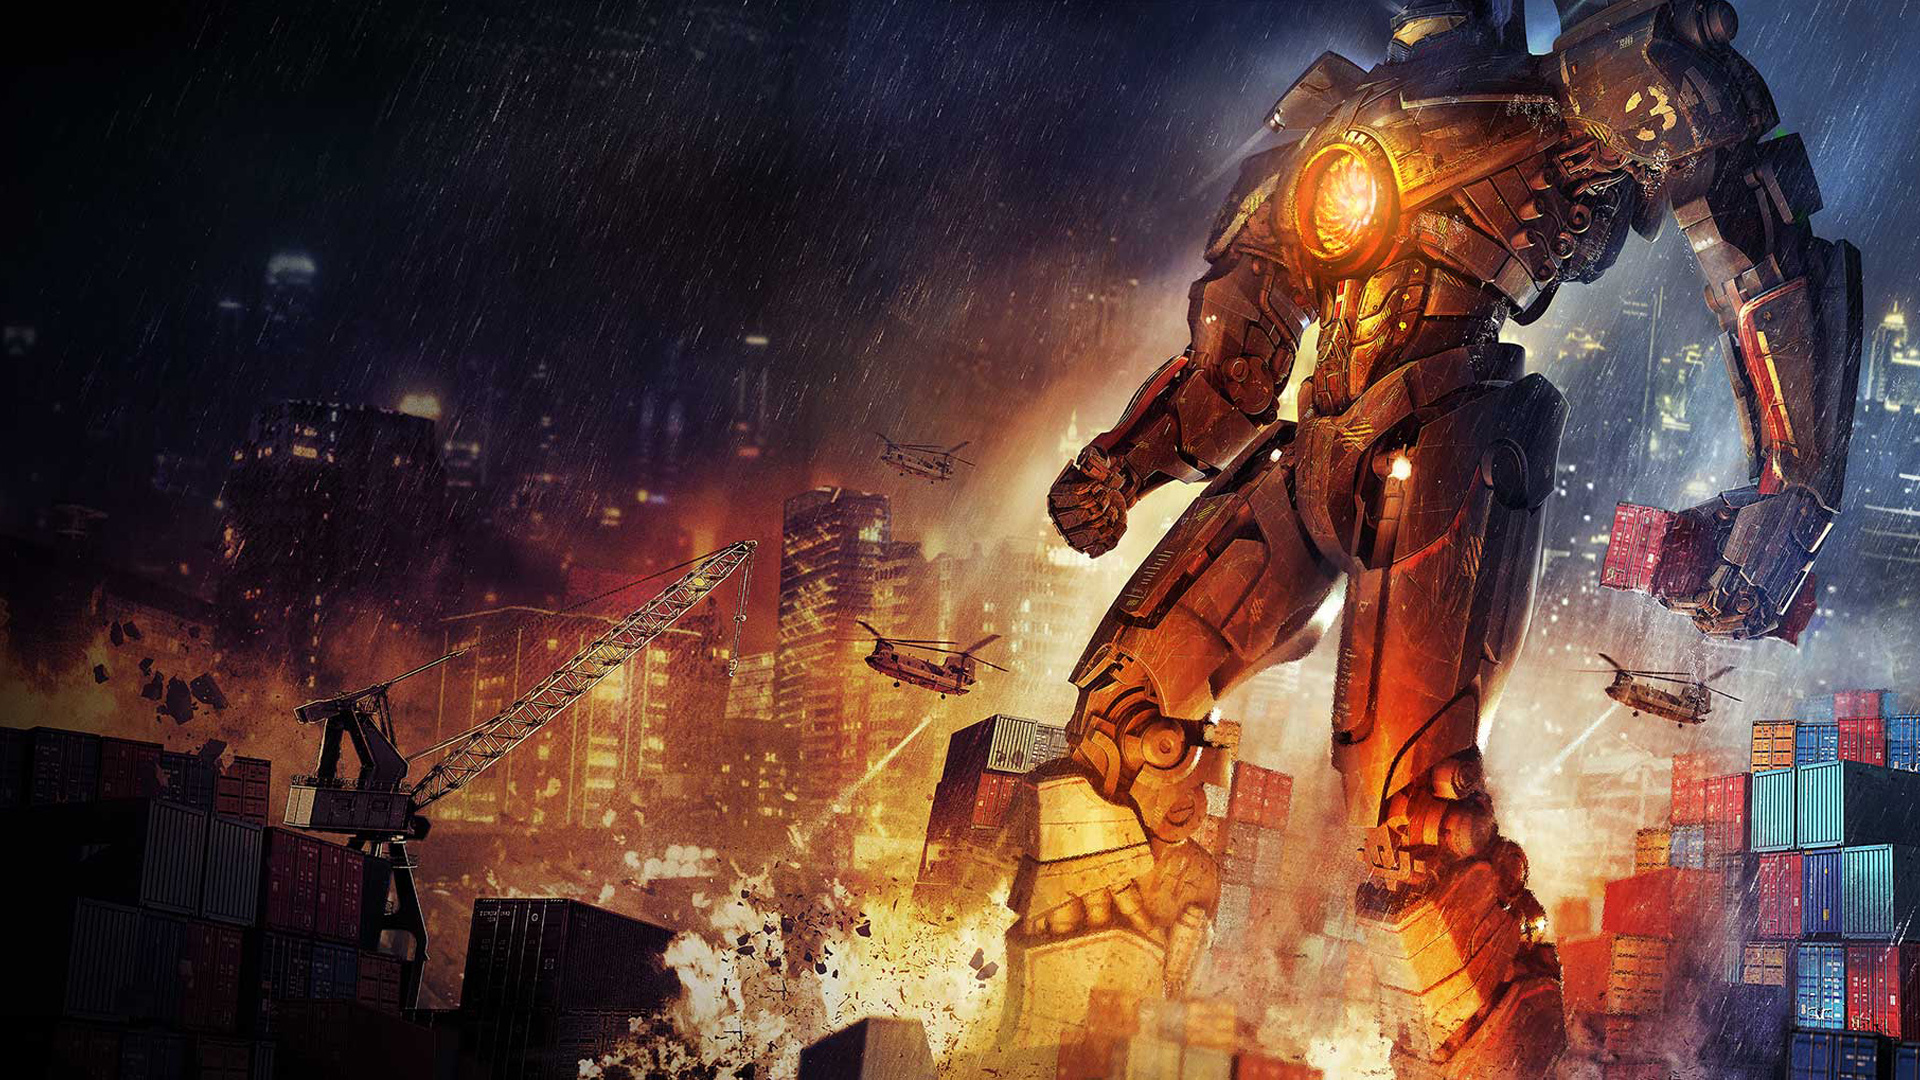 General 1920x1080 Pacific Rim movies artwork 2013 (Year) science fiction